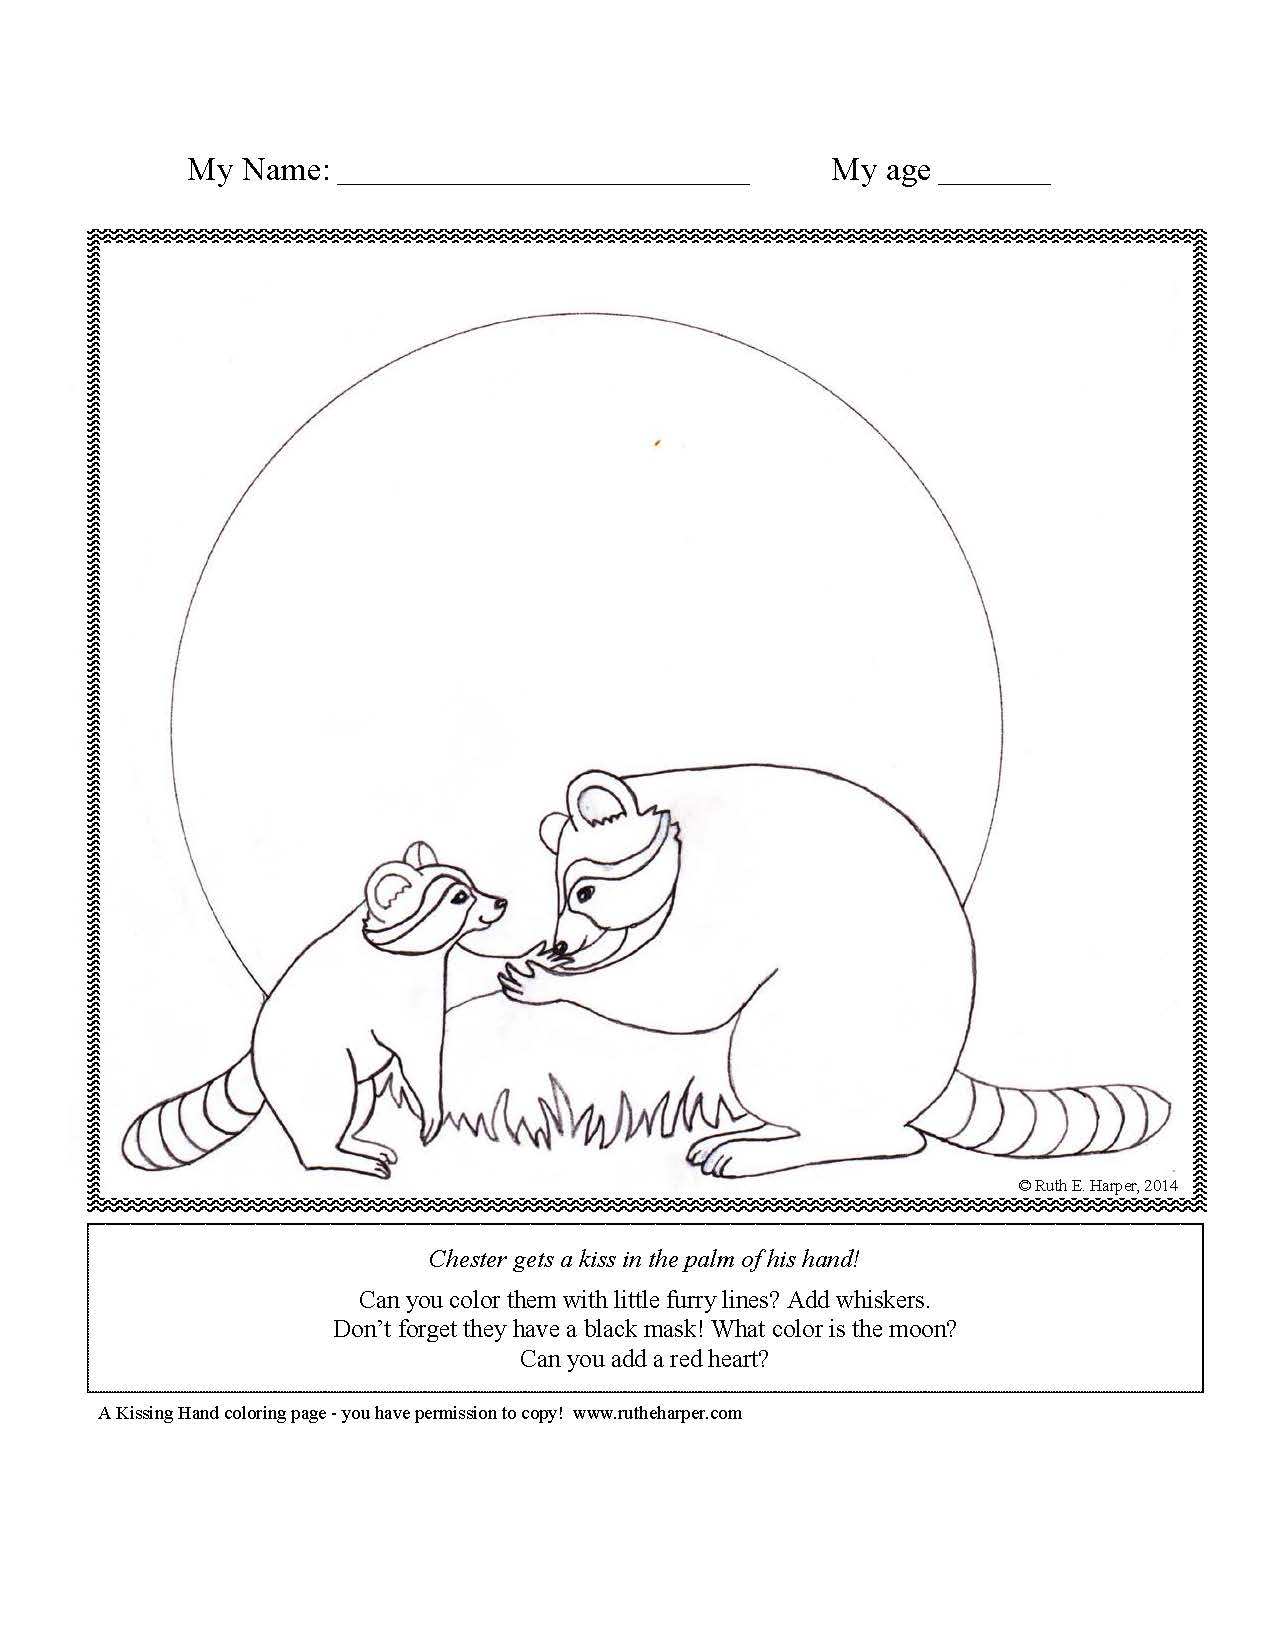 Kissing Hand Coloring Pages — Ruth E. Harper